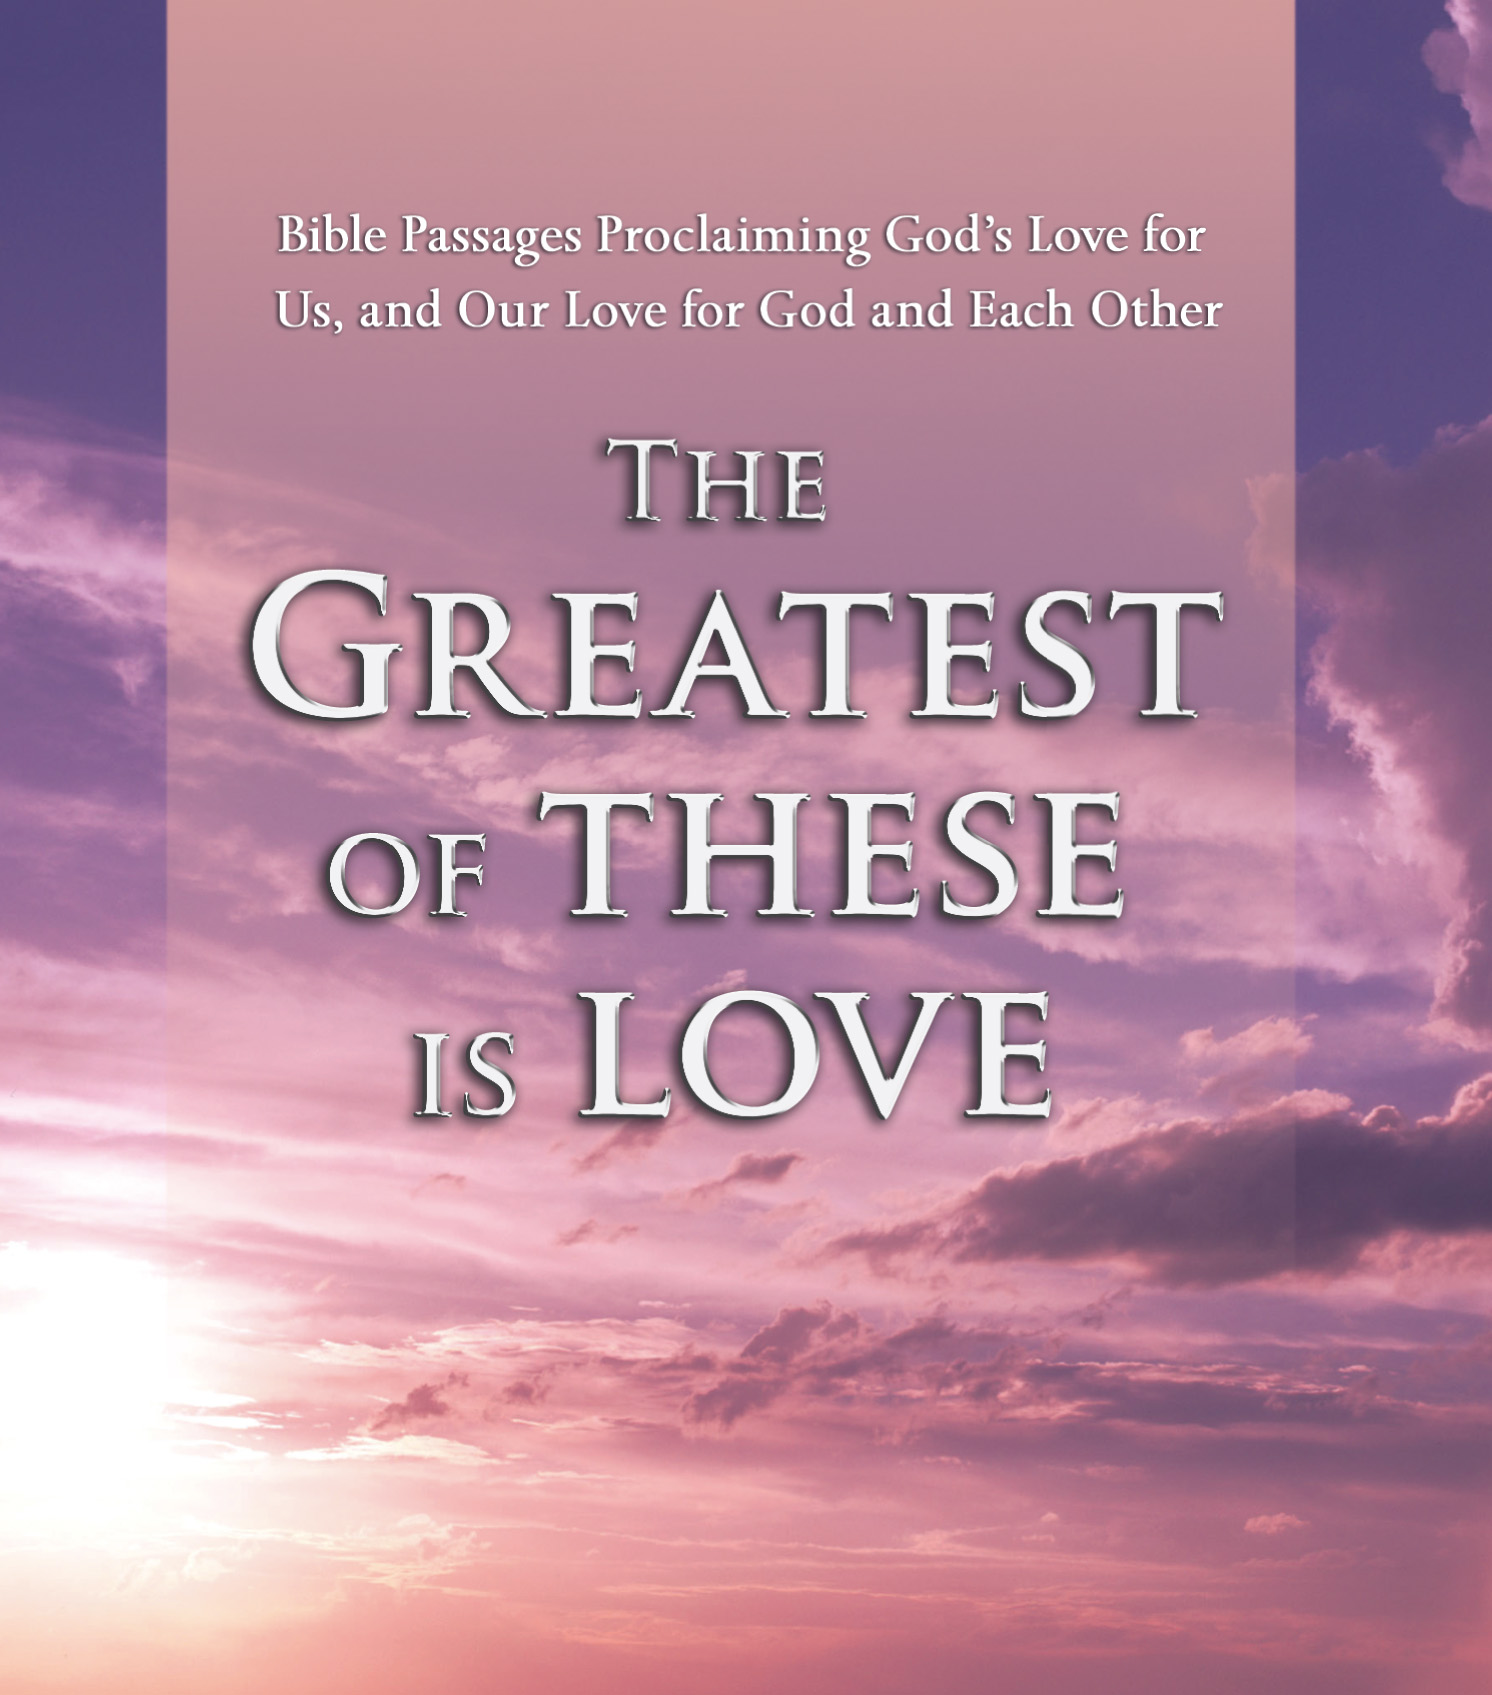 The Greatest of These is Love Audiobook by Various